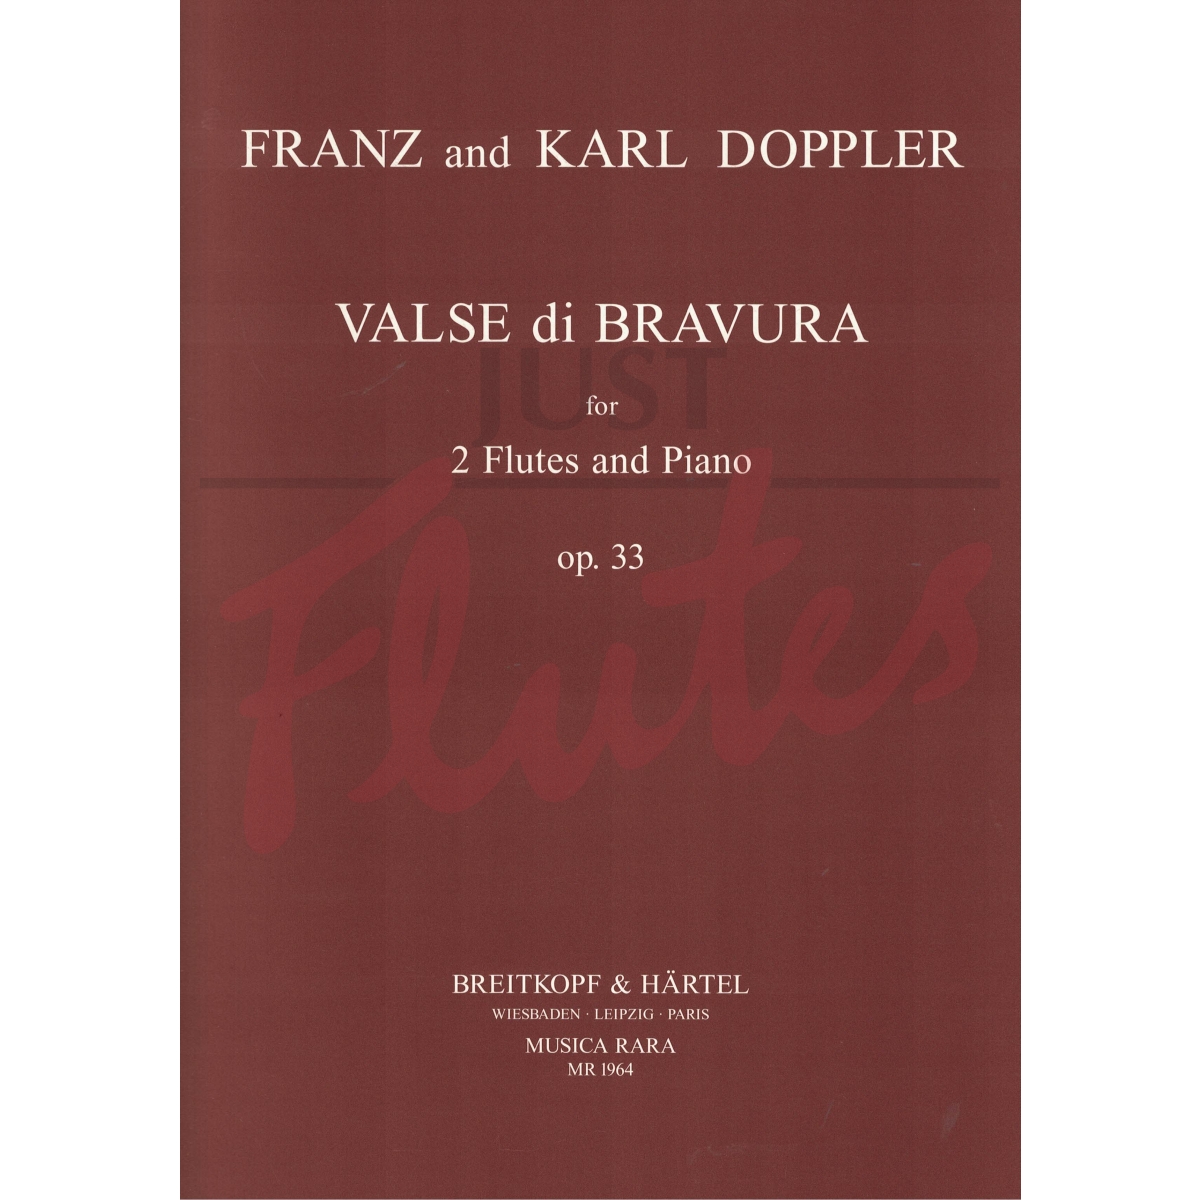 Valse di Bravura for Two Flutes and Piano